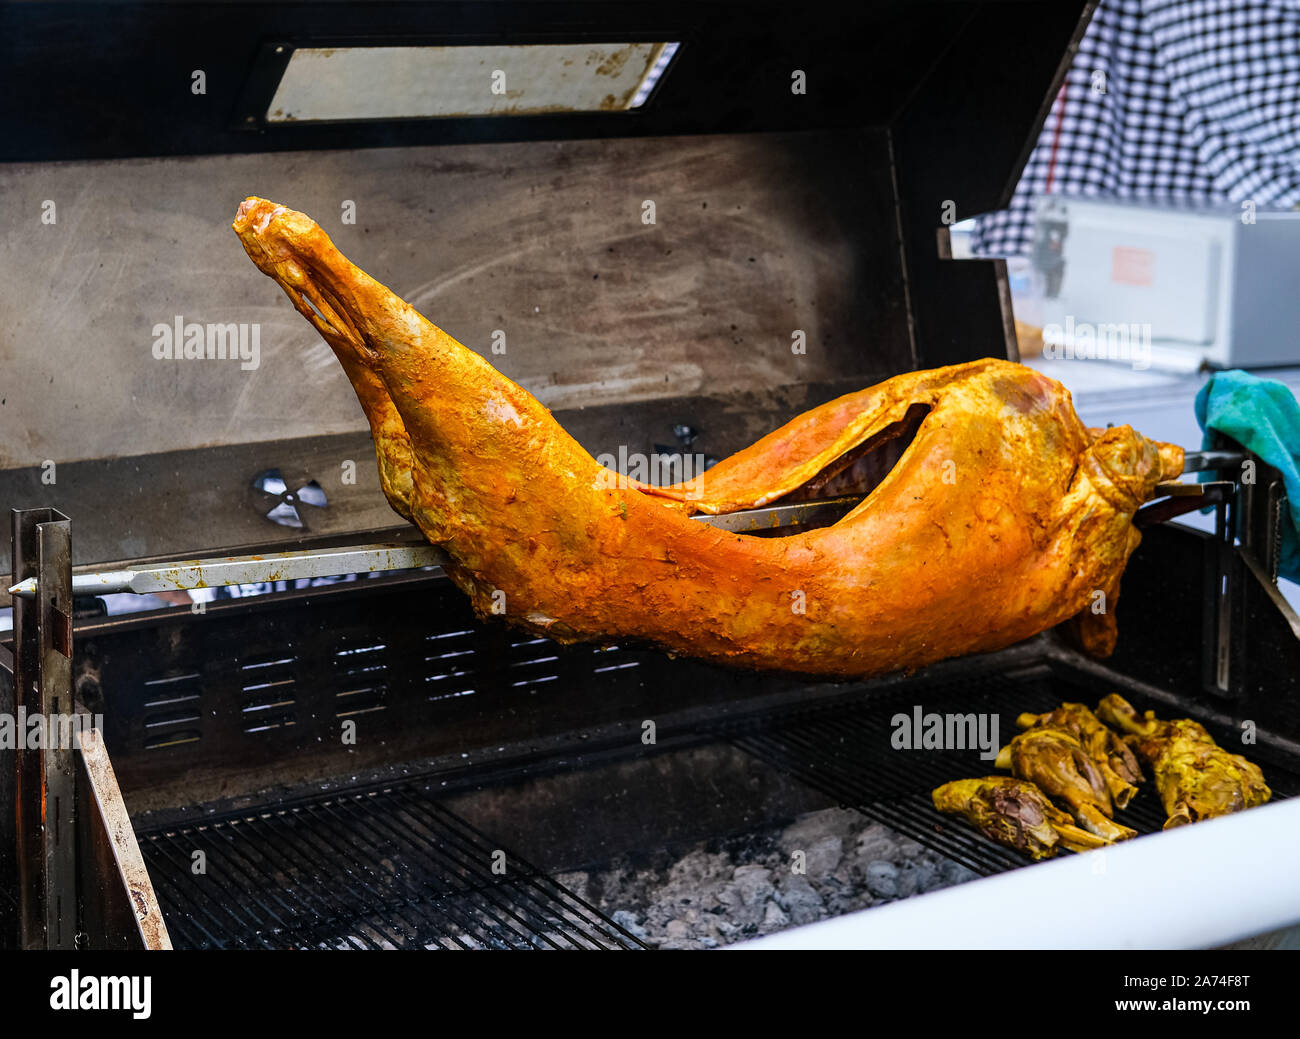 Roast Pig on Grill Spit at Night Market Stock Photo